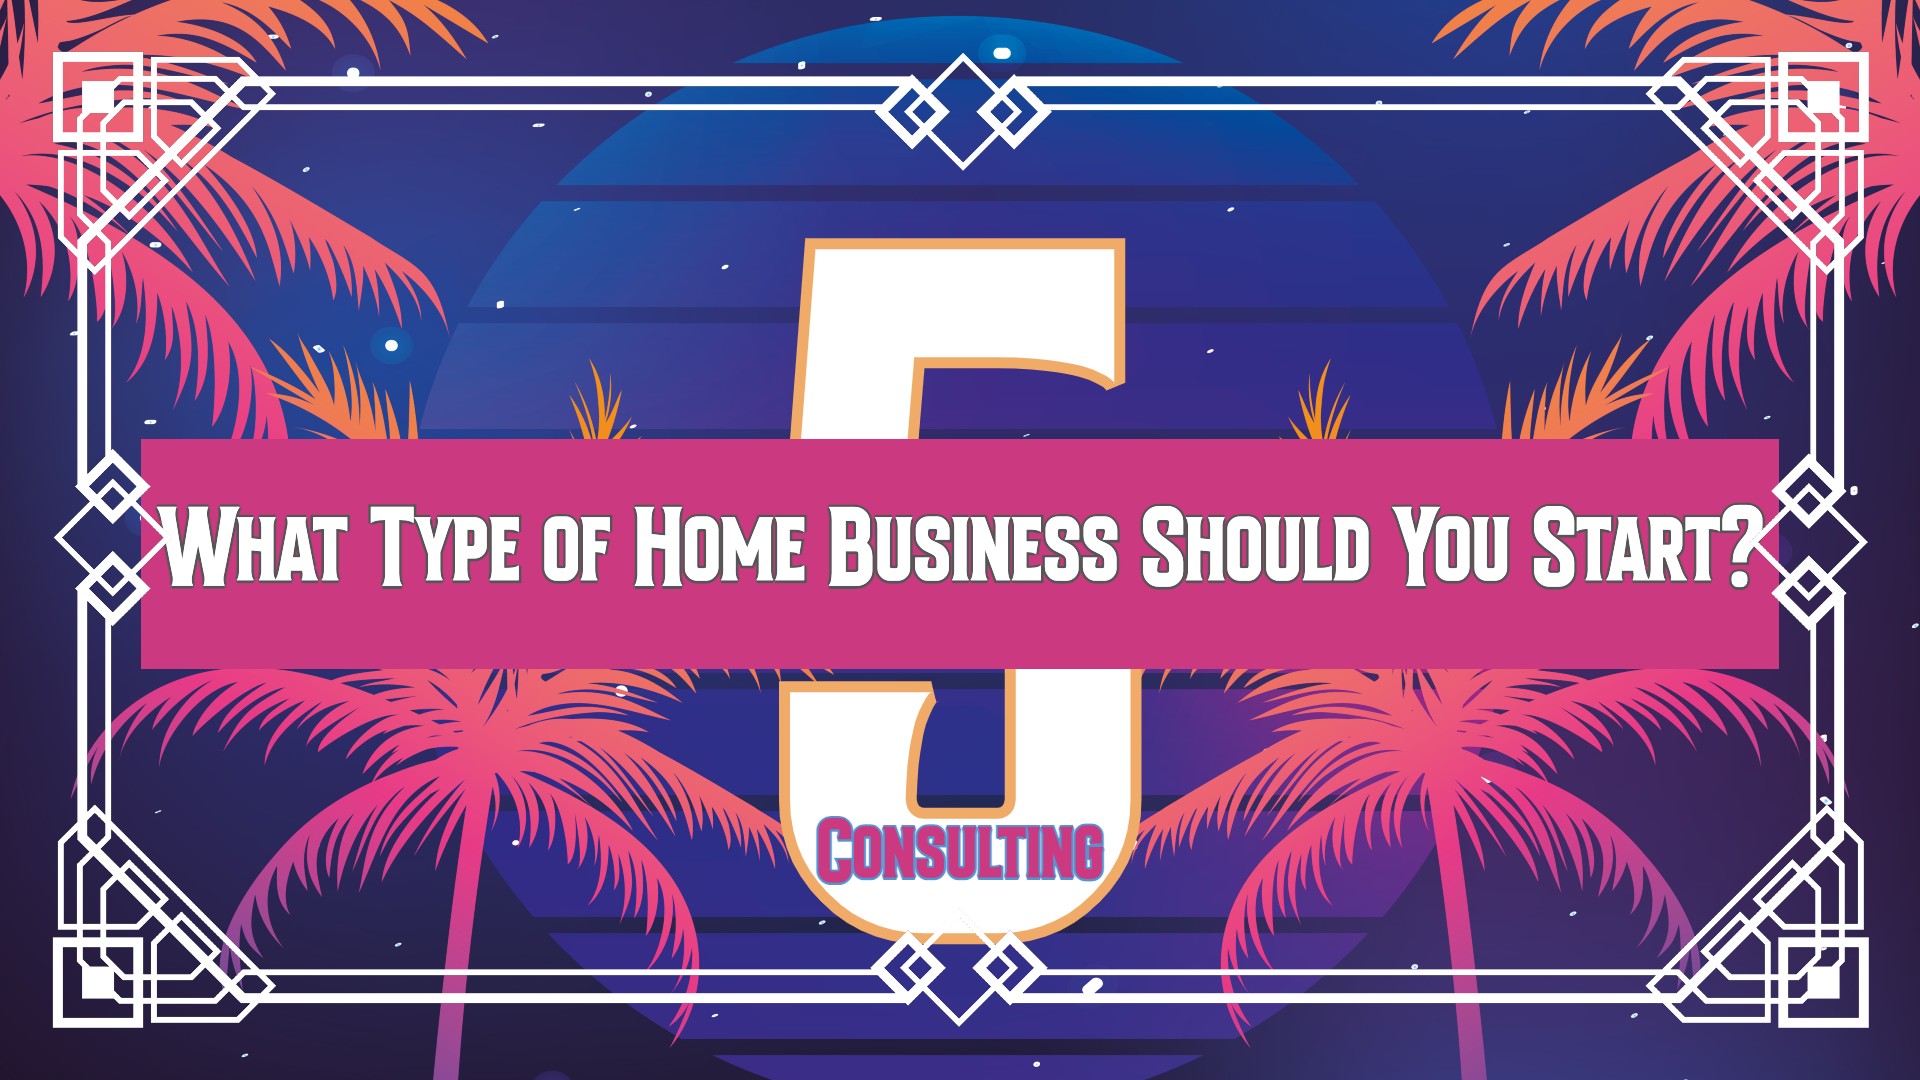 What Type of Home Business Should You Start 5: Consulting